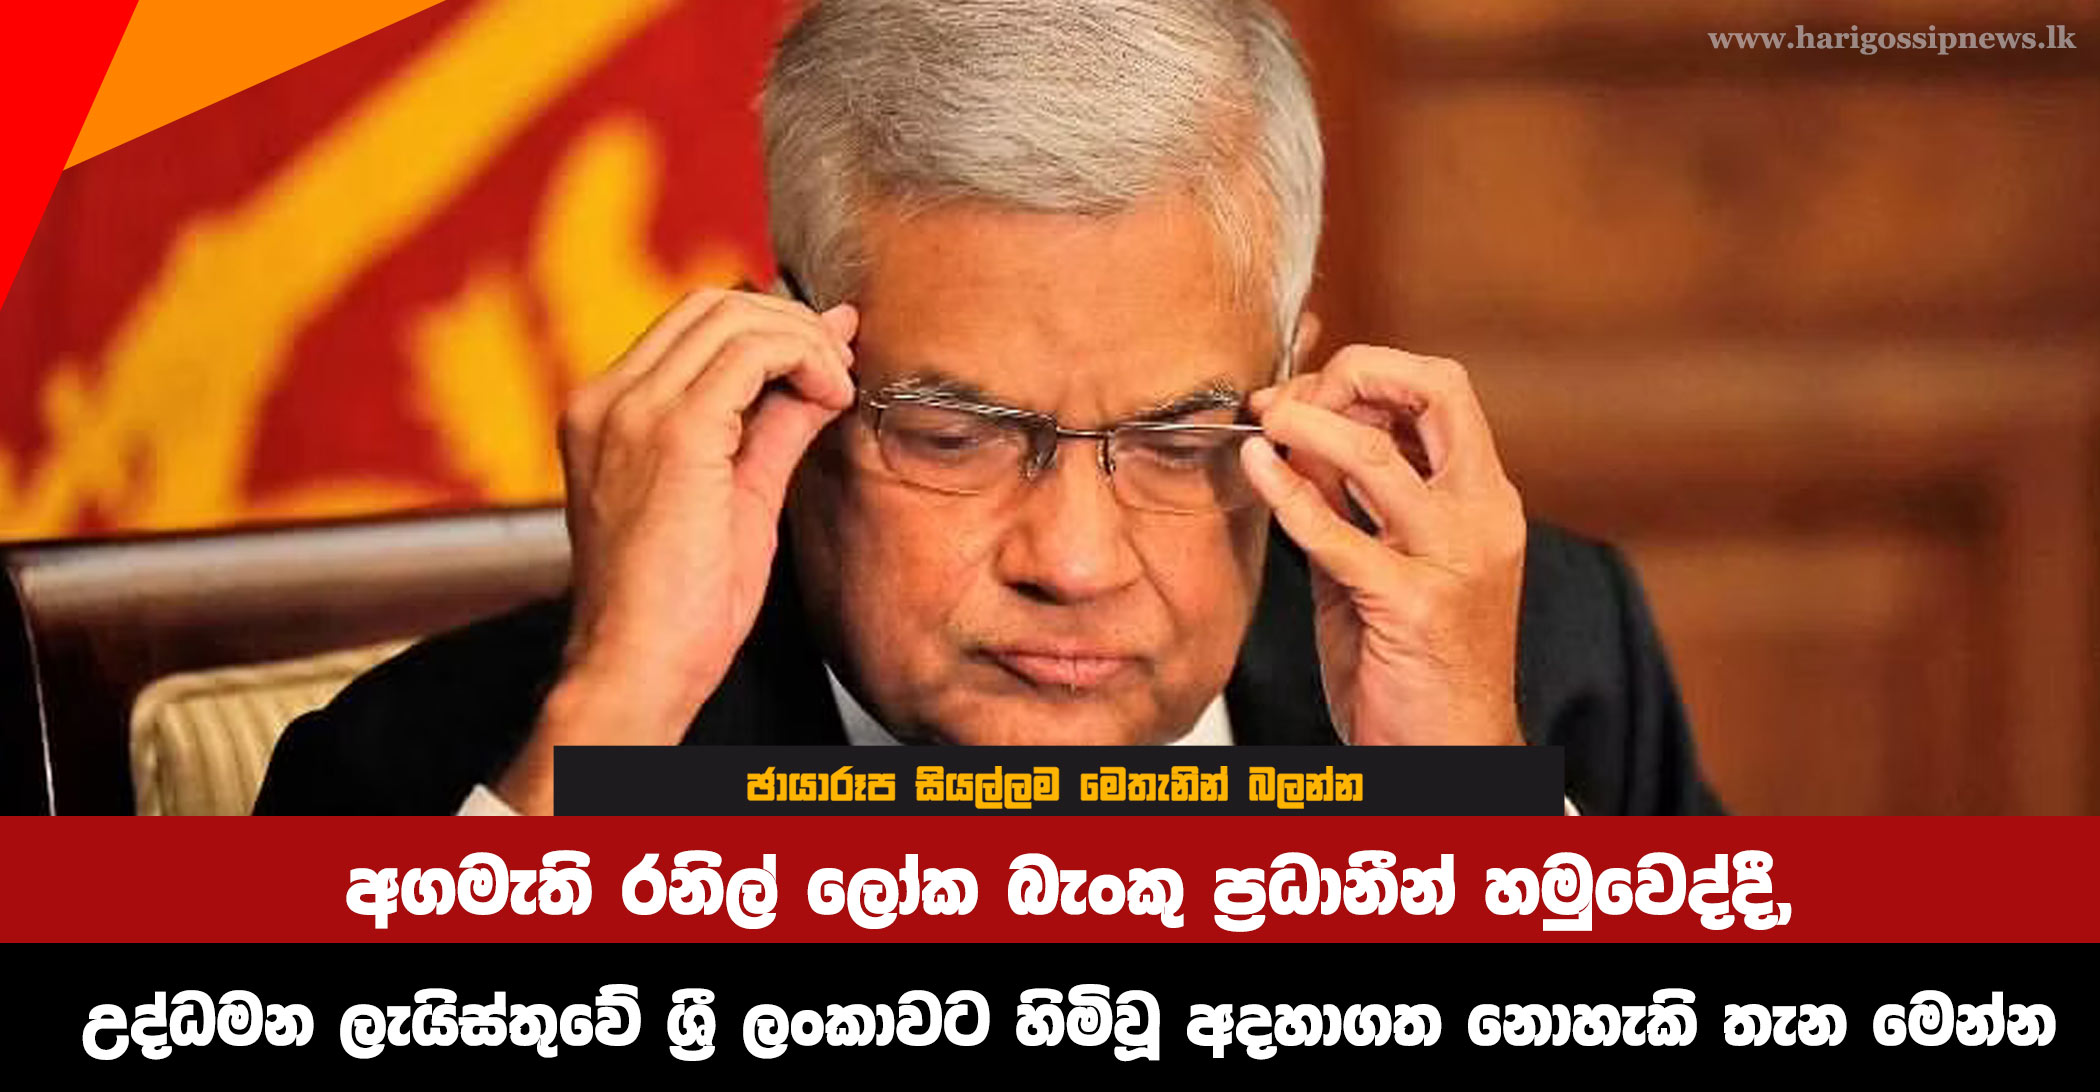 Here-is-the-incredible-place-Sri-Lanka-has-on-the-inflation-list-when-Prime-Minister-Ranil-meets-World-Bank-chiefs